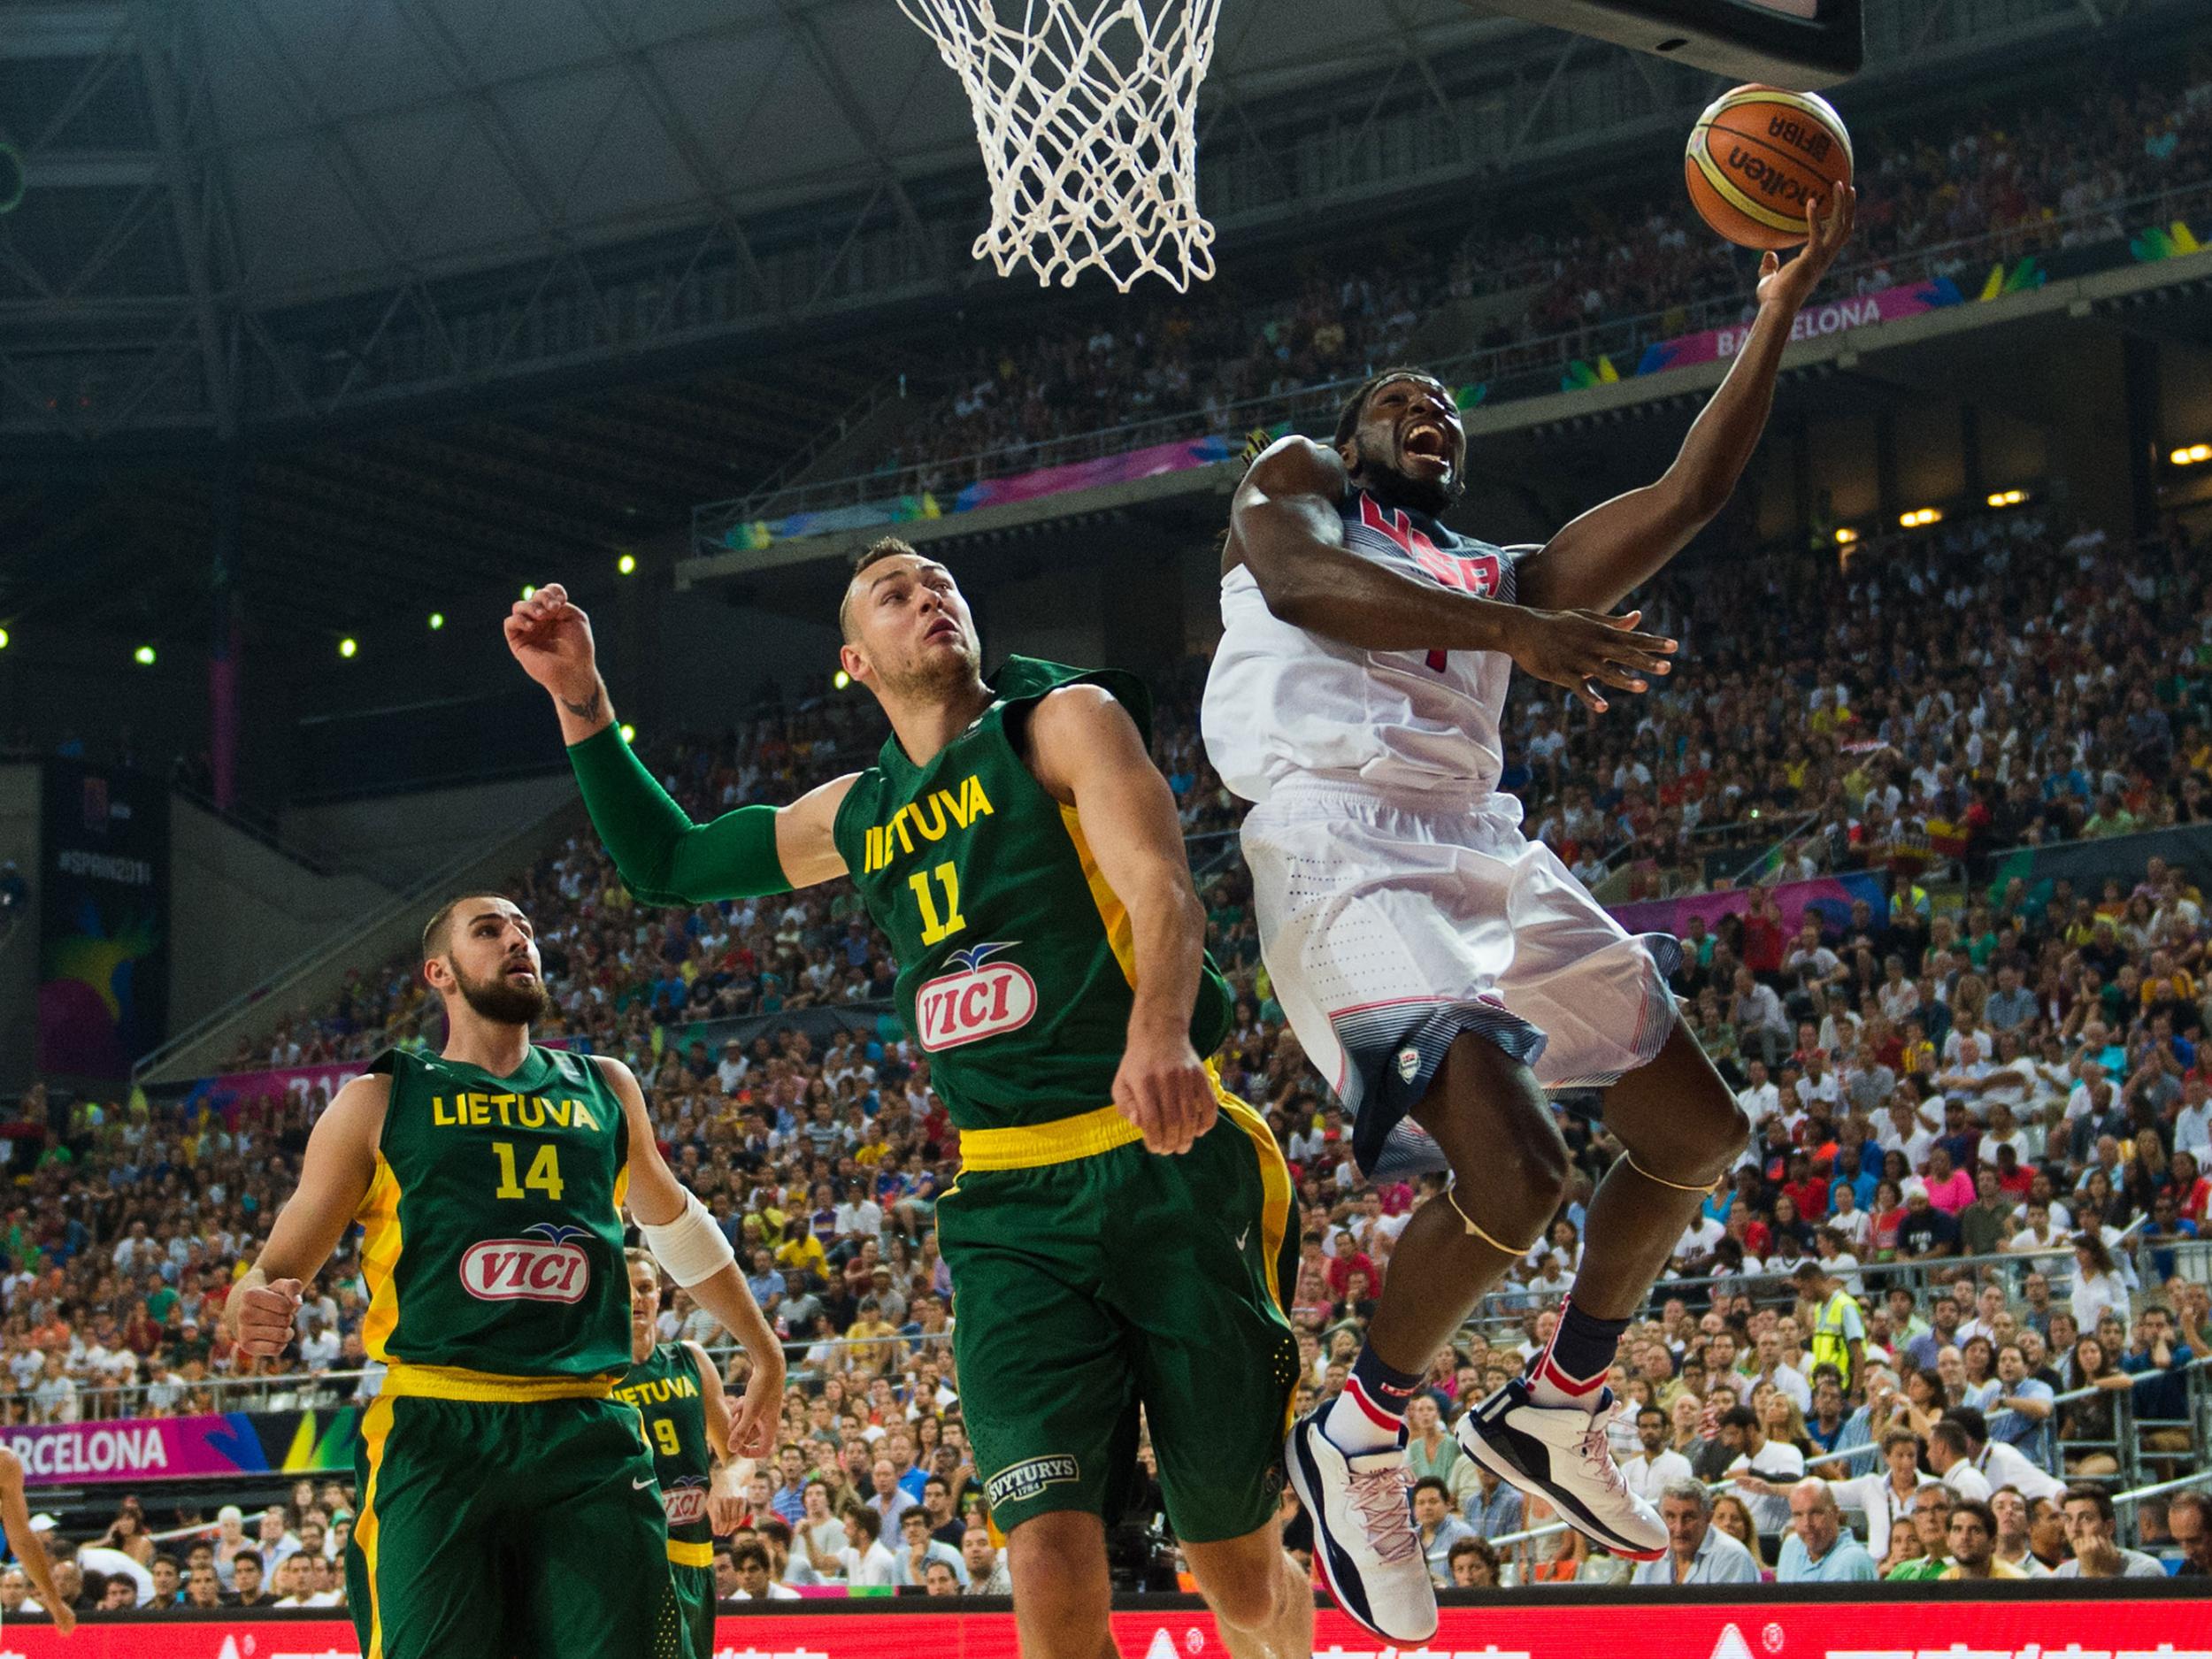 The USA plays Lithuania in the 2014 Basketball World Cup